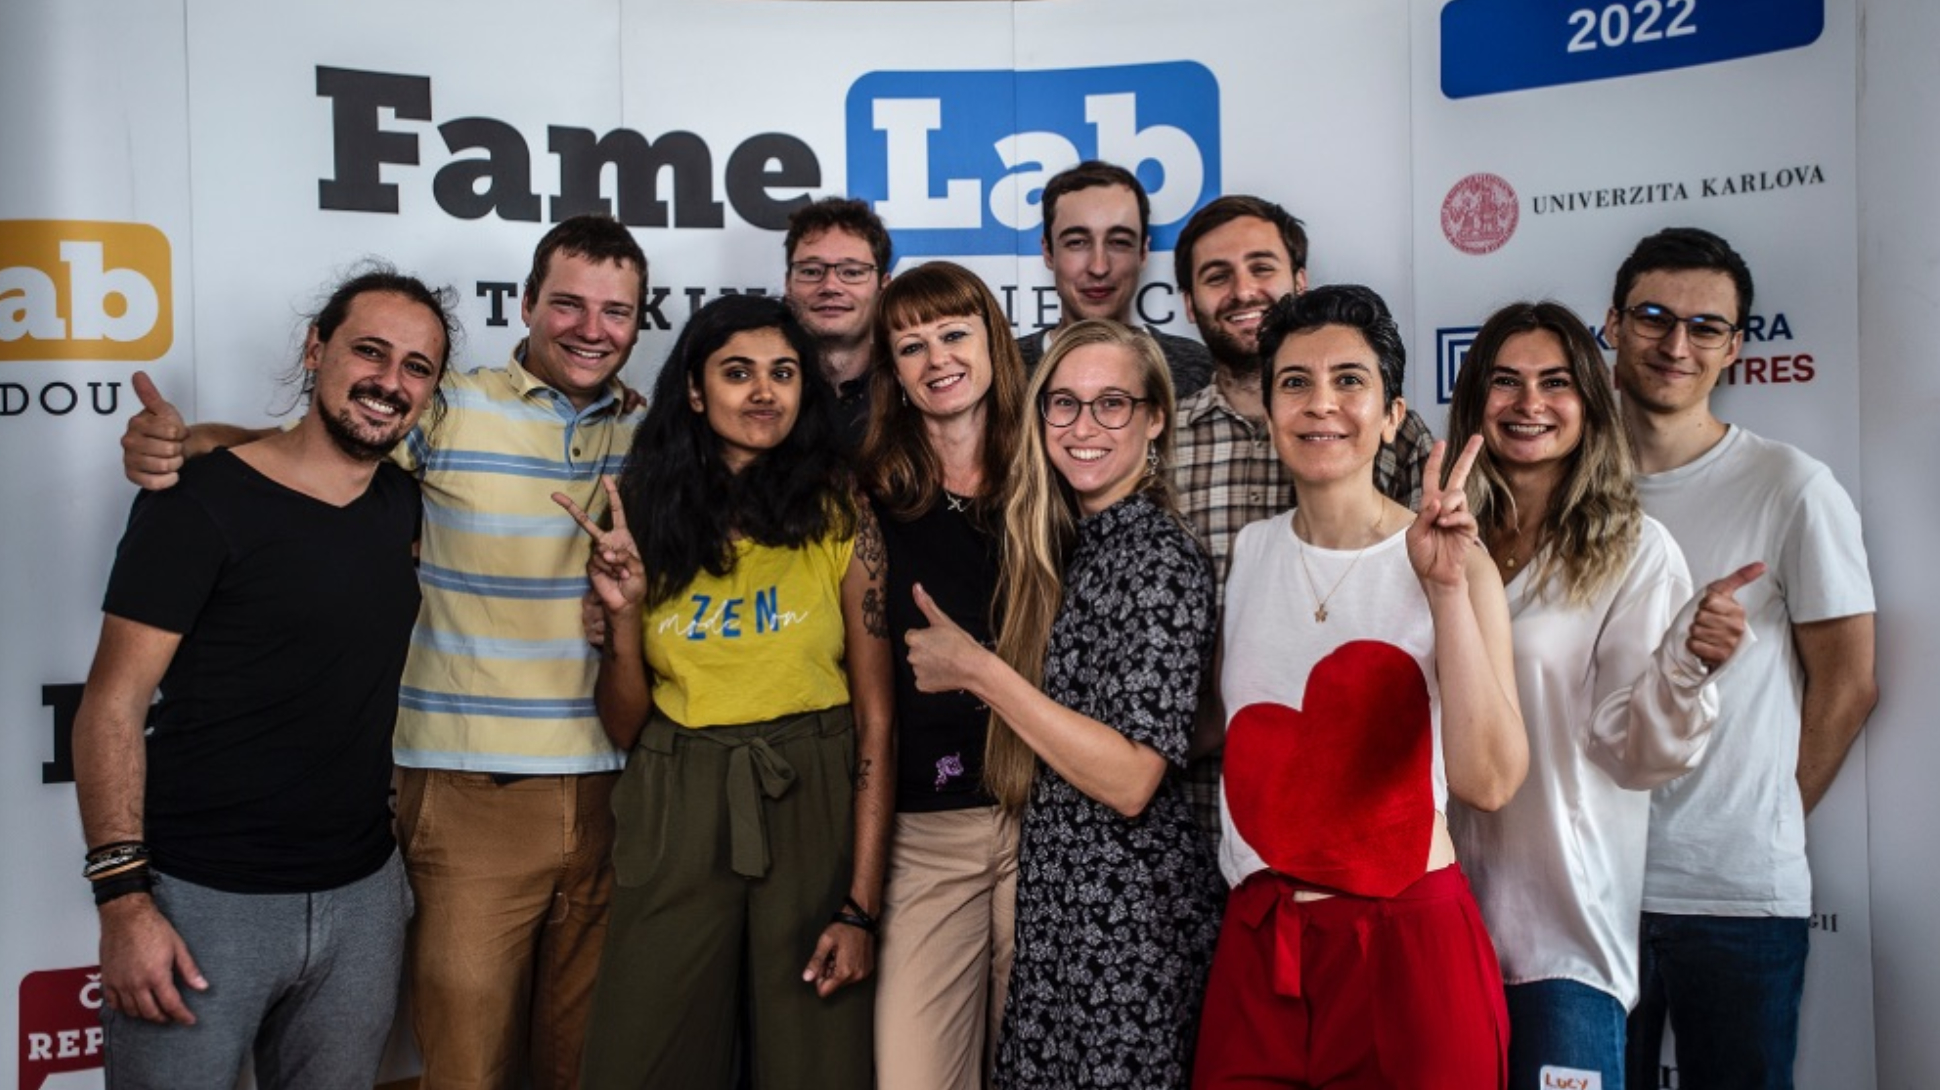 FameLab contenders ready for final